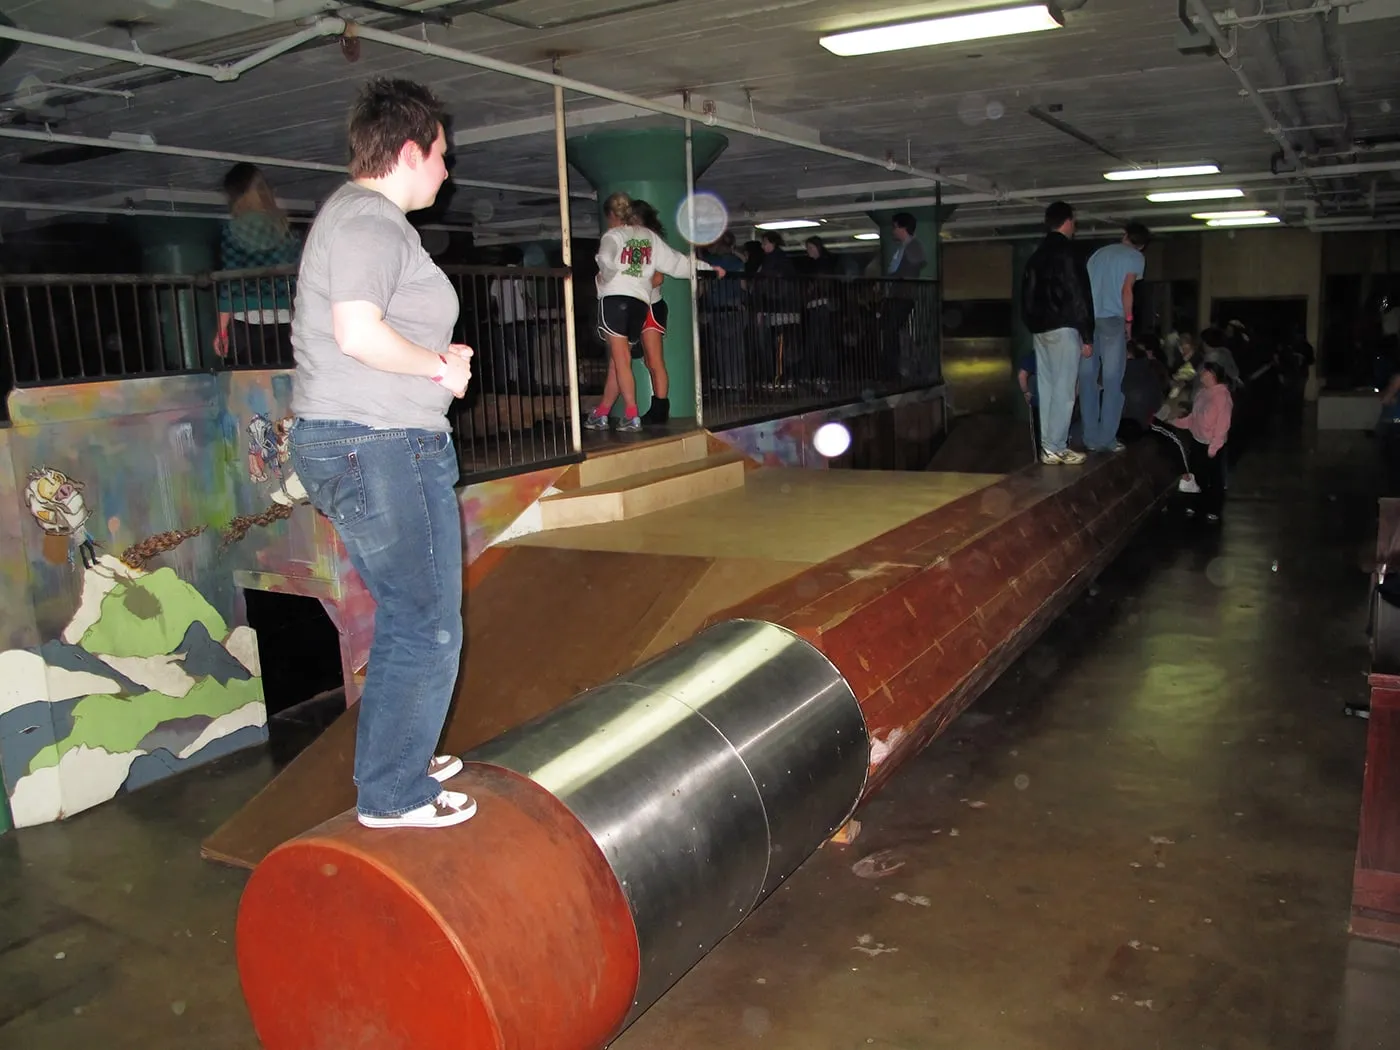 World's Largest Pencil at the City Museum in St. Louis, Missouri